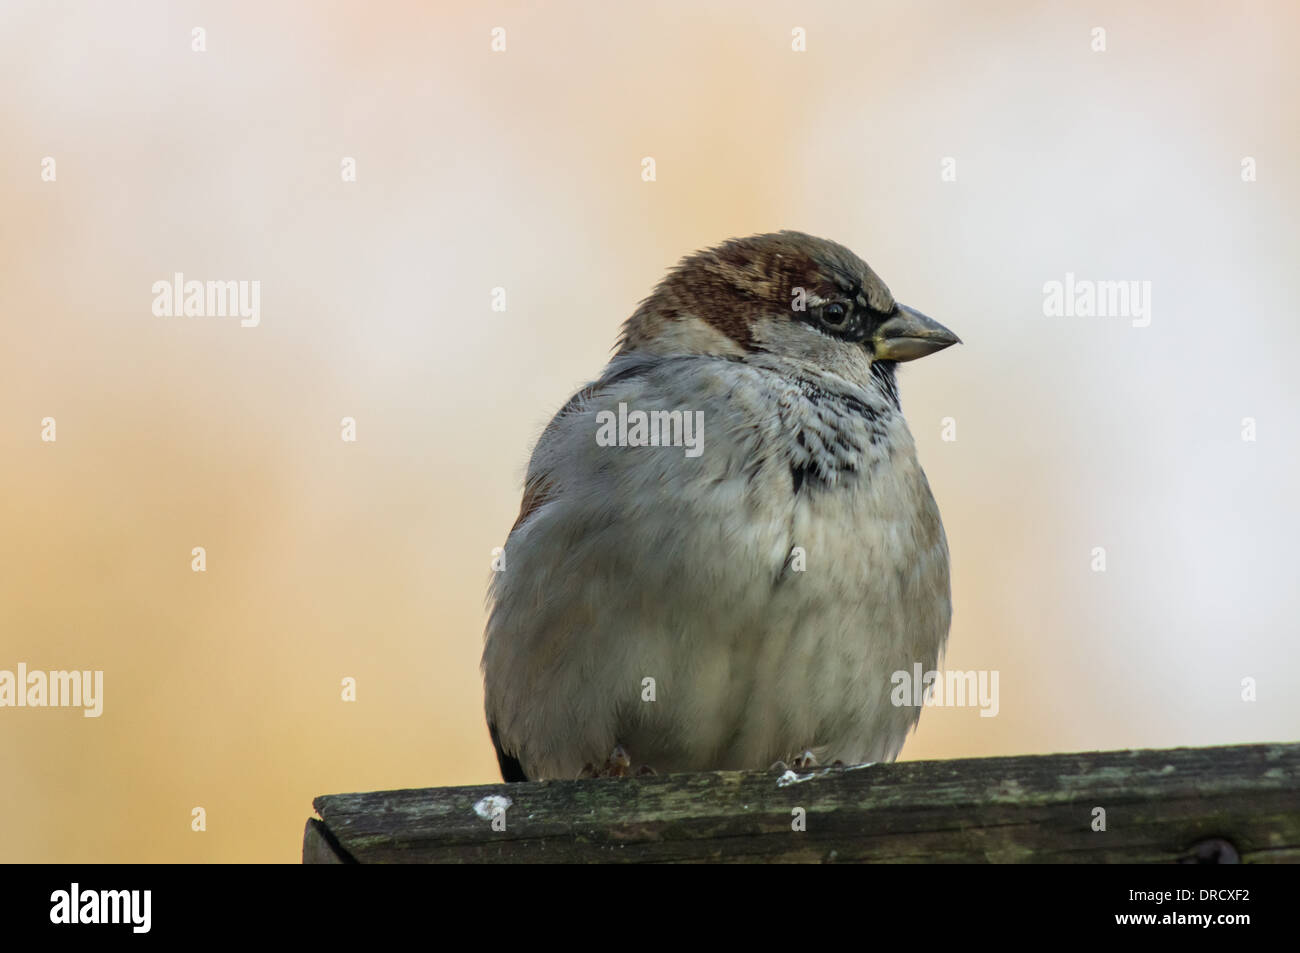 Sparrow perching on wooden fence Banque D'Images